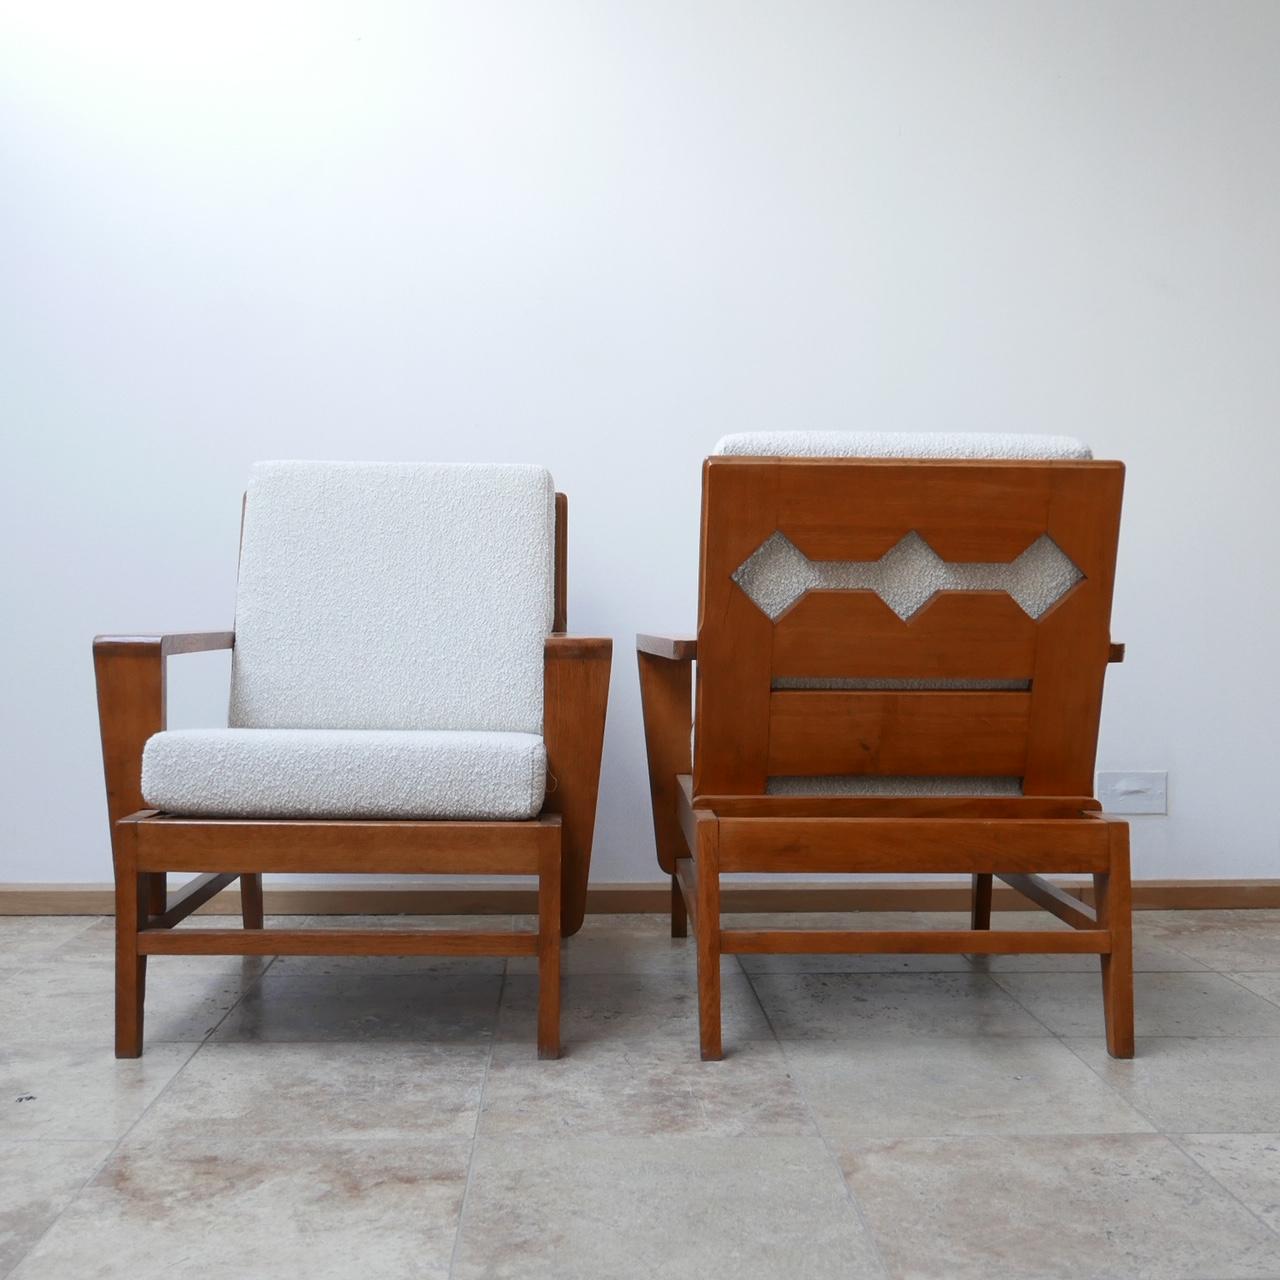 A pair of rare armchairs attributed to René Gabriel.

Re-construction period, circa 1940s, French.

Re-upholstered with an off white boucle fabric.

A scarce model not seen before but with the characteristic kicked out legs.

Dimensions: 74